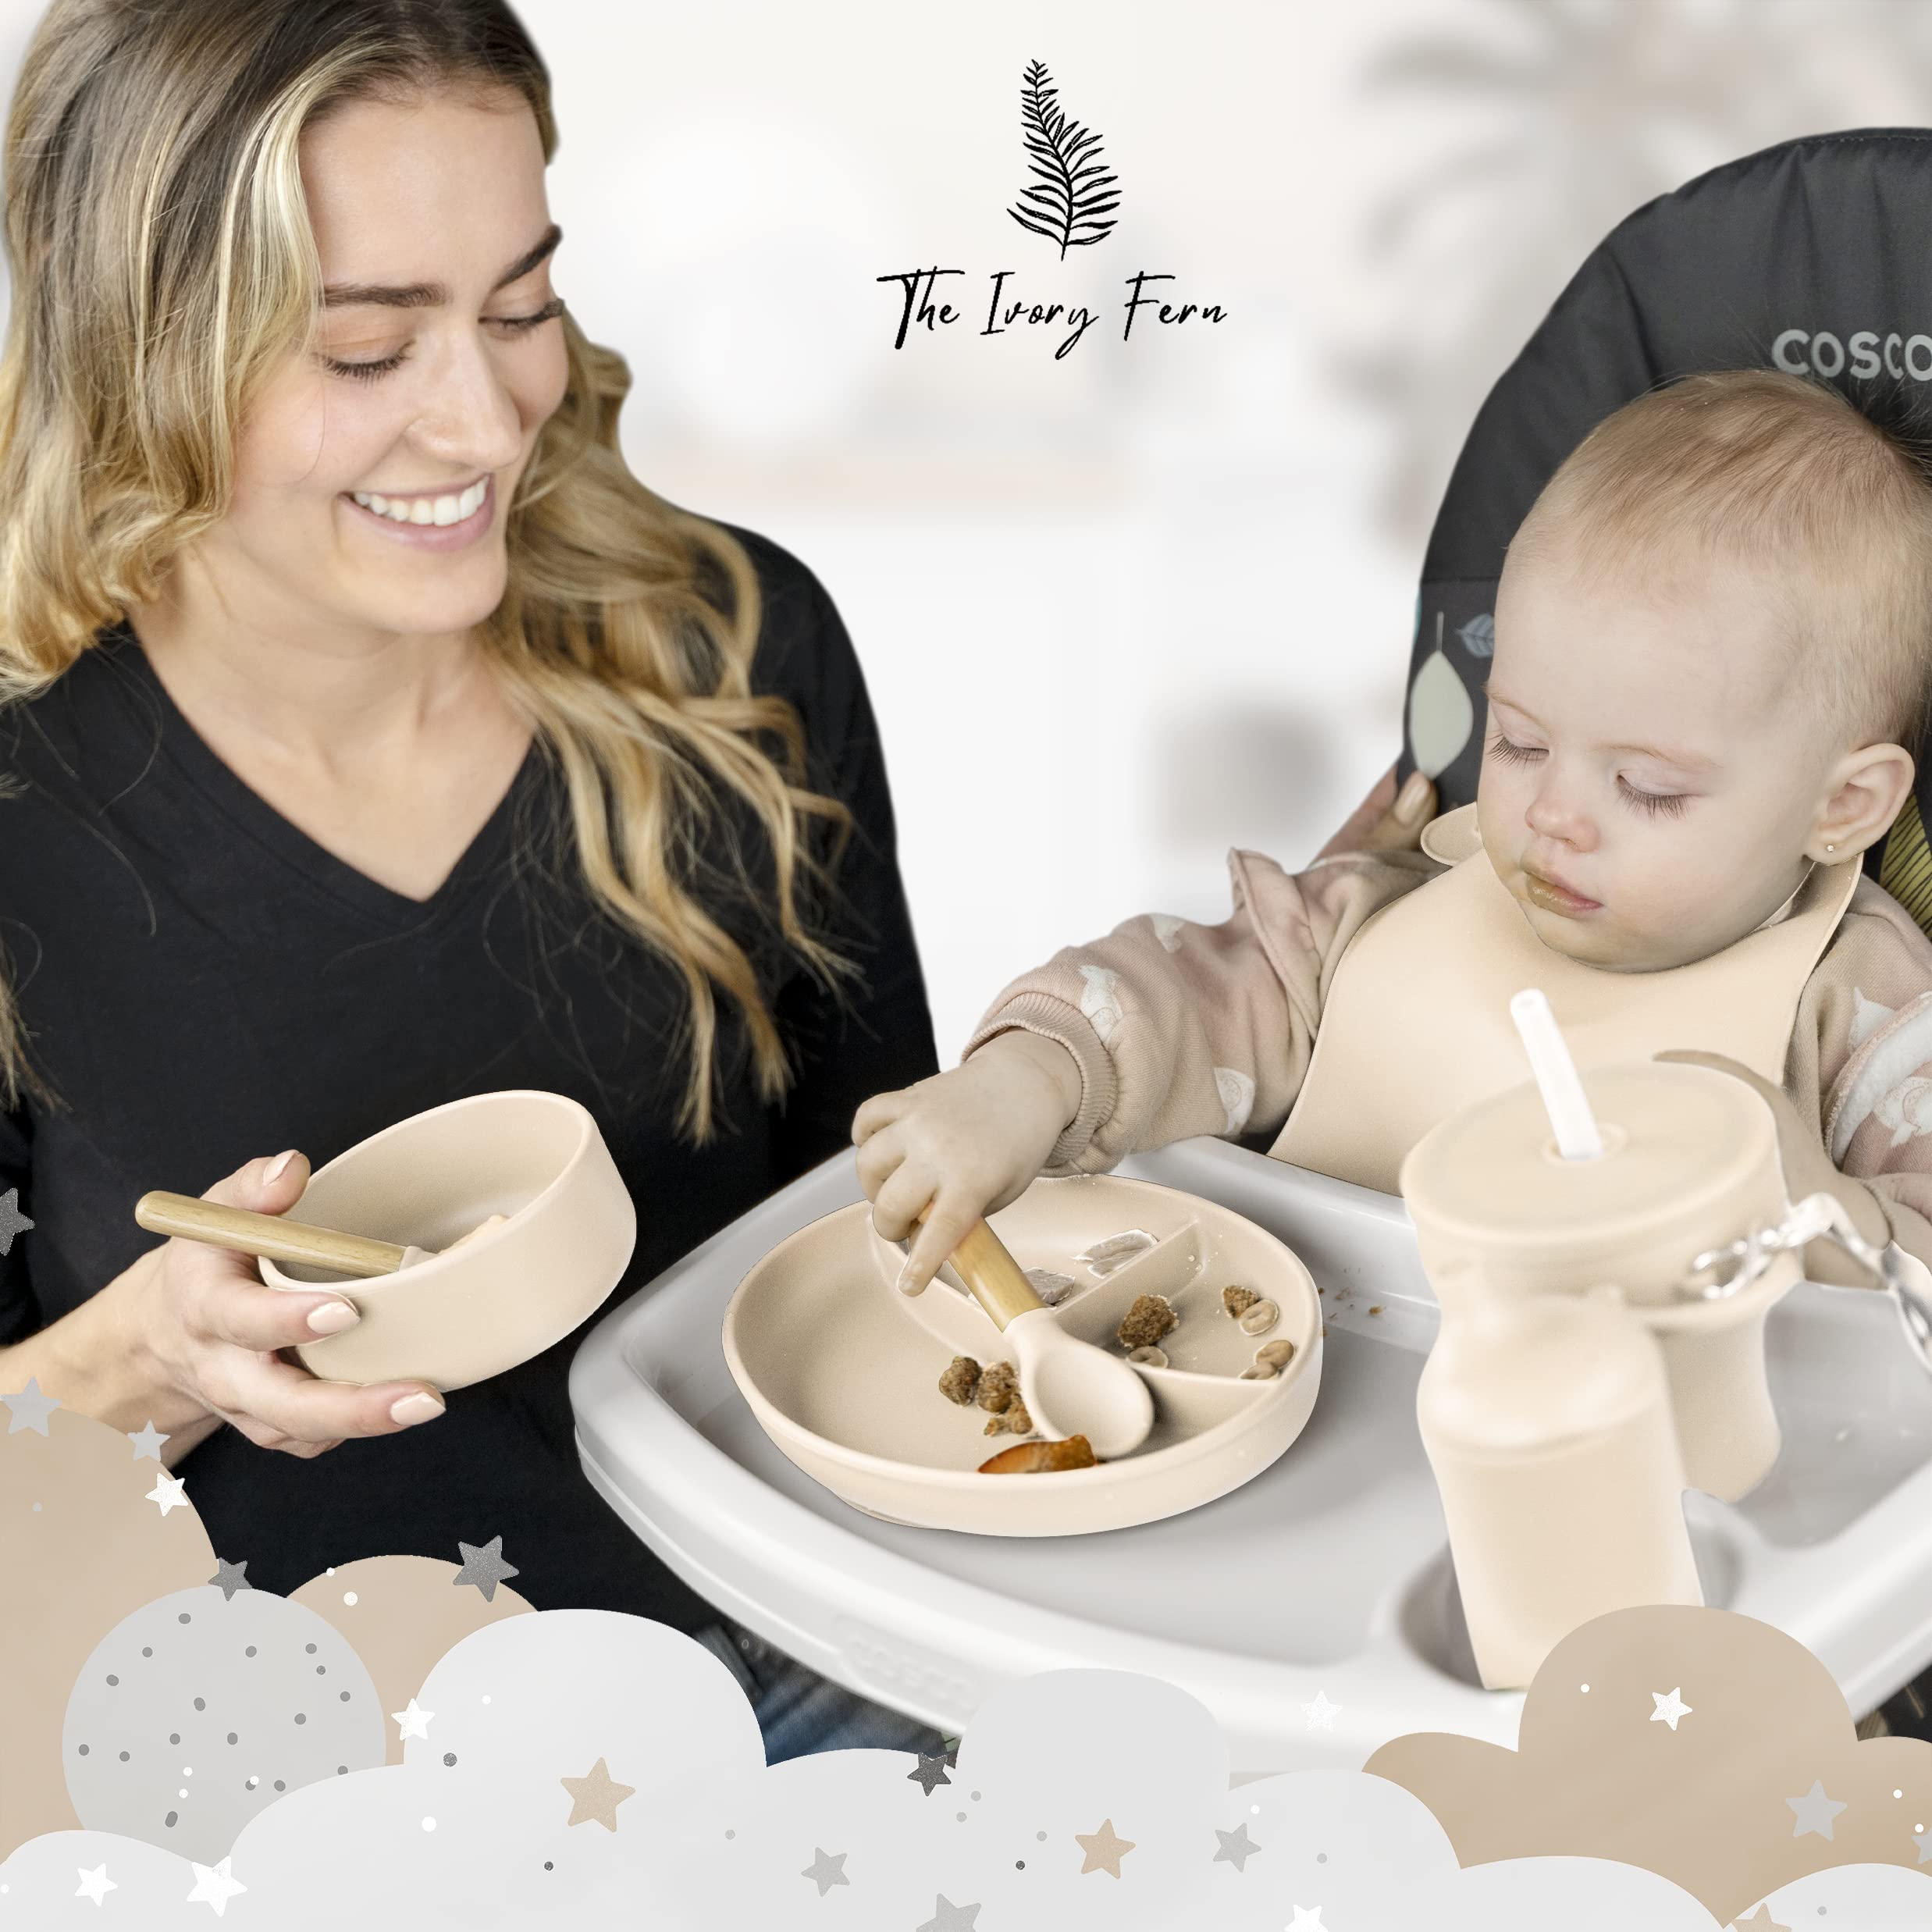 The Ivory Fern Silicone Baby Feeding Set,Baby Plates and Bowls Set, Bib, Convertible Drinking, Snack Cups, Feeding supplies